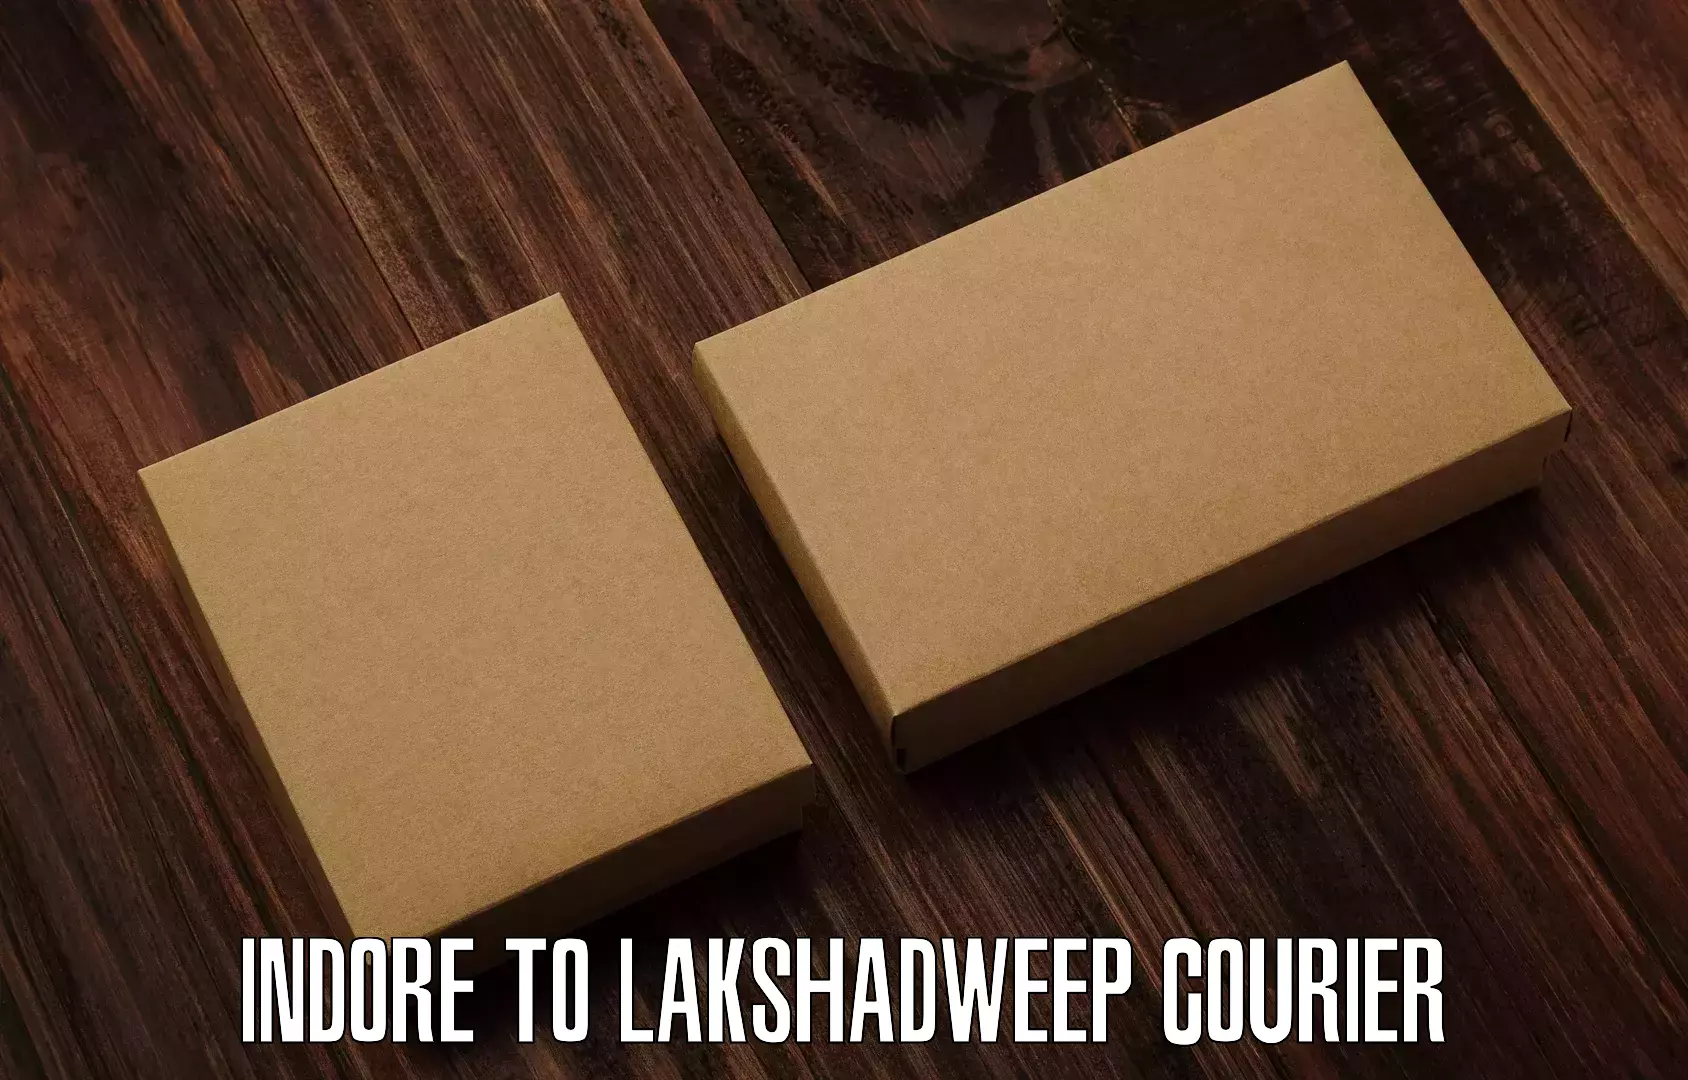 Nationwide delivery network Indore to Lakshadweep